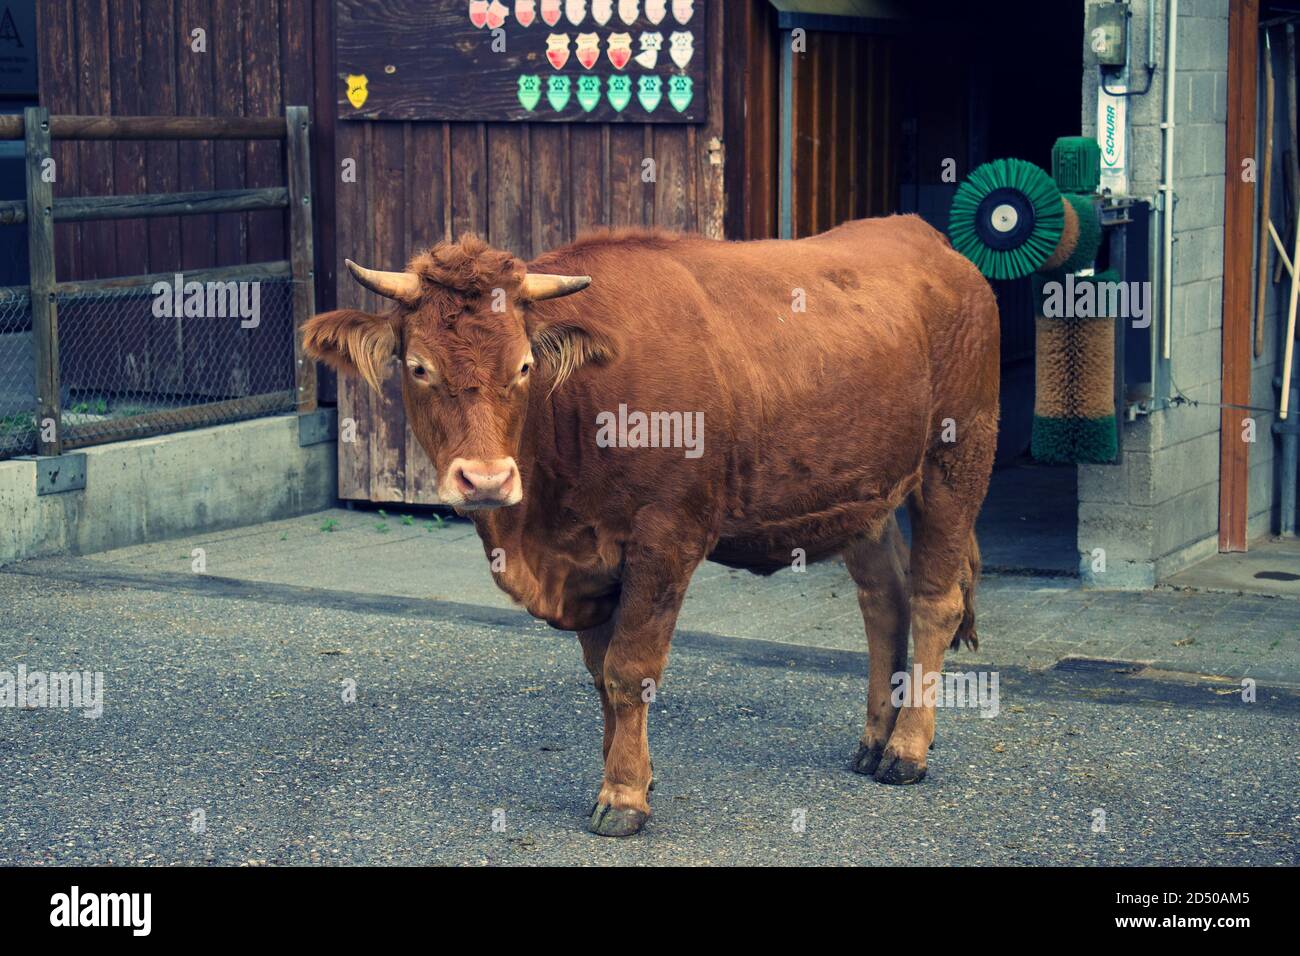 Limpurg Cow breed, in a Germany Zoo enclosure. Stock Photo